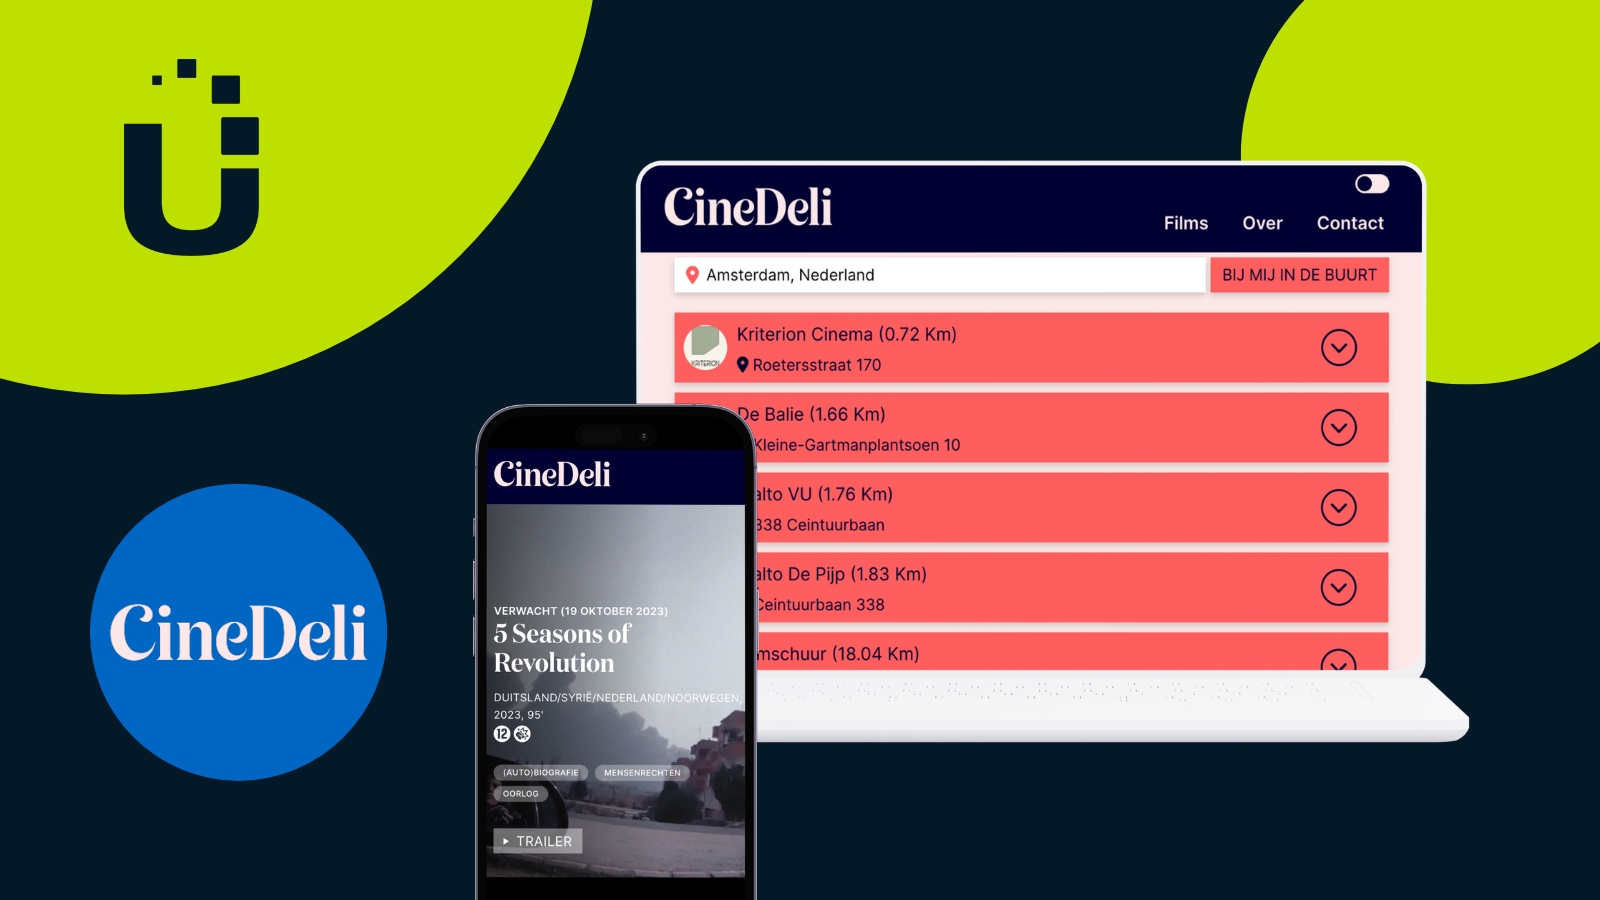 Image with a black background. The usheru logo is in the top left corner over a green circle. Below it is the CineDeli logo, also in a green circle. To its right is an image of a computer and a phone showing the CineDeli website.